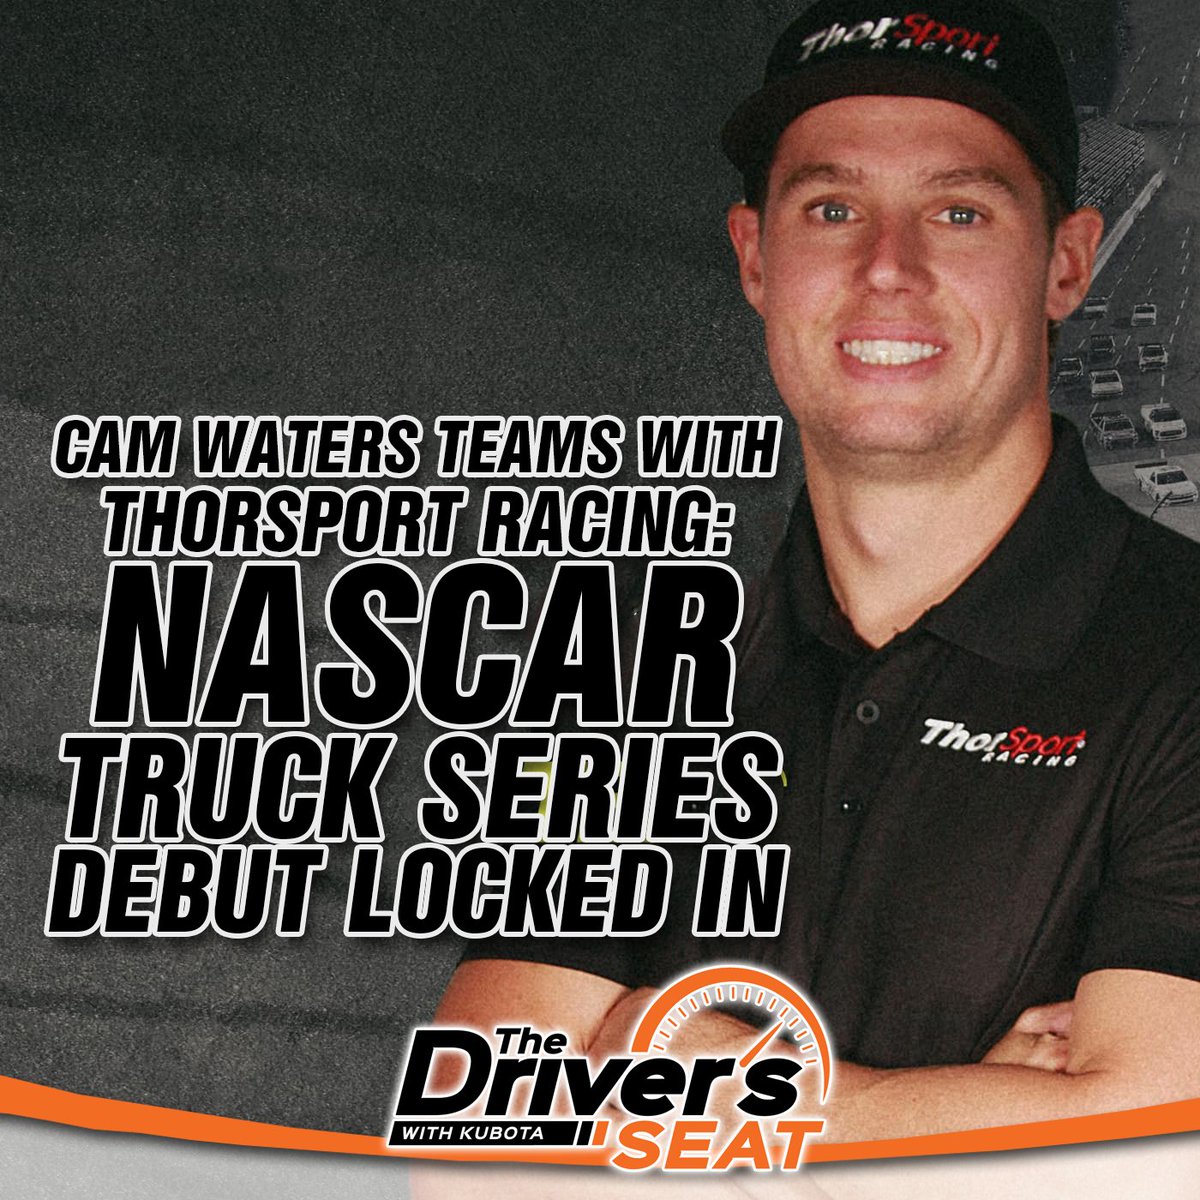 .@TickfordRacing's Cam Waters will be making his @NASCAR_Trucks debut next weekend at Martinsville for @ThorSportRacing.

ThorSport Racing are the defending 2023 Truck Series Champions and will field a fleet of Ford F-150s on the short oval course Saturday, April 6 Aussie time.